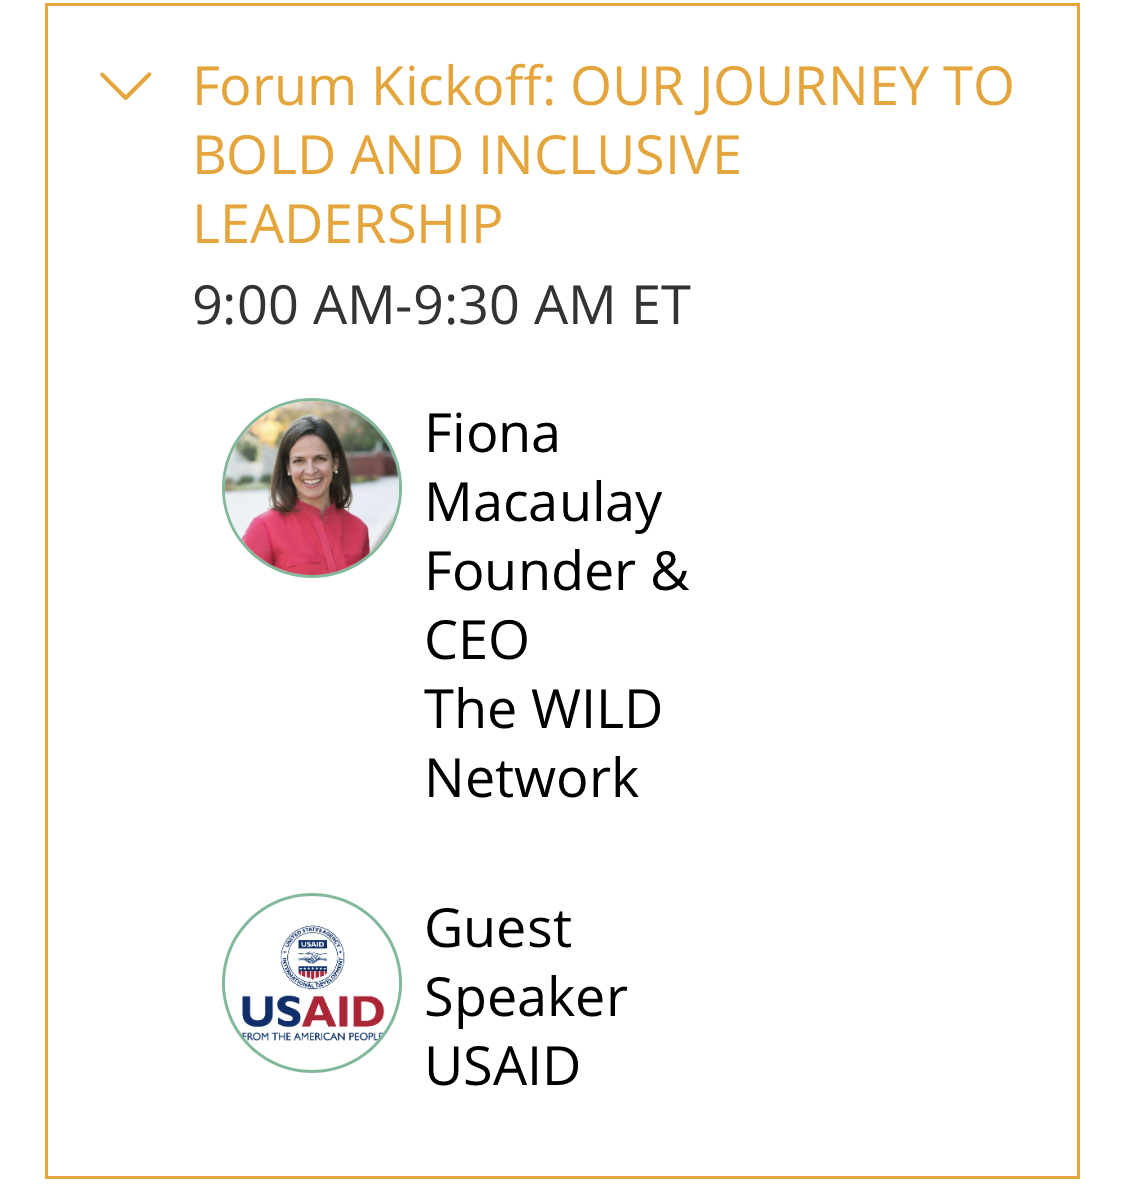 What we are detailing below includes our comments and suggestions on the panels that have been put together for your upcoming forum in May starting with the plenary with USAID on "Our Journey to Bold and Inclusive Leadership."  @CharitySoWhite  @nomorewanels  @NonprofitAF 